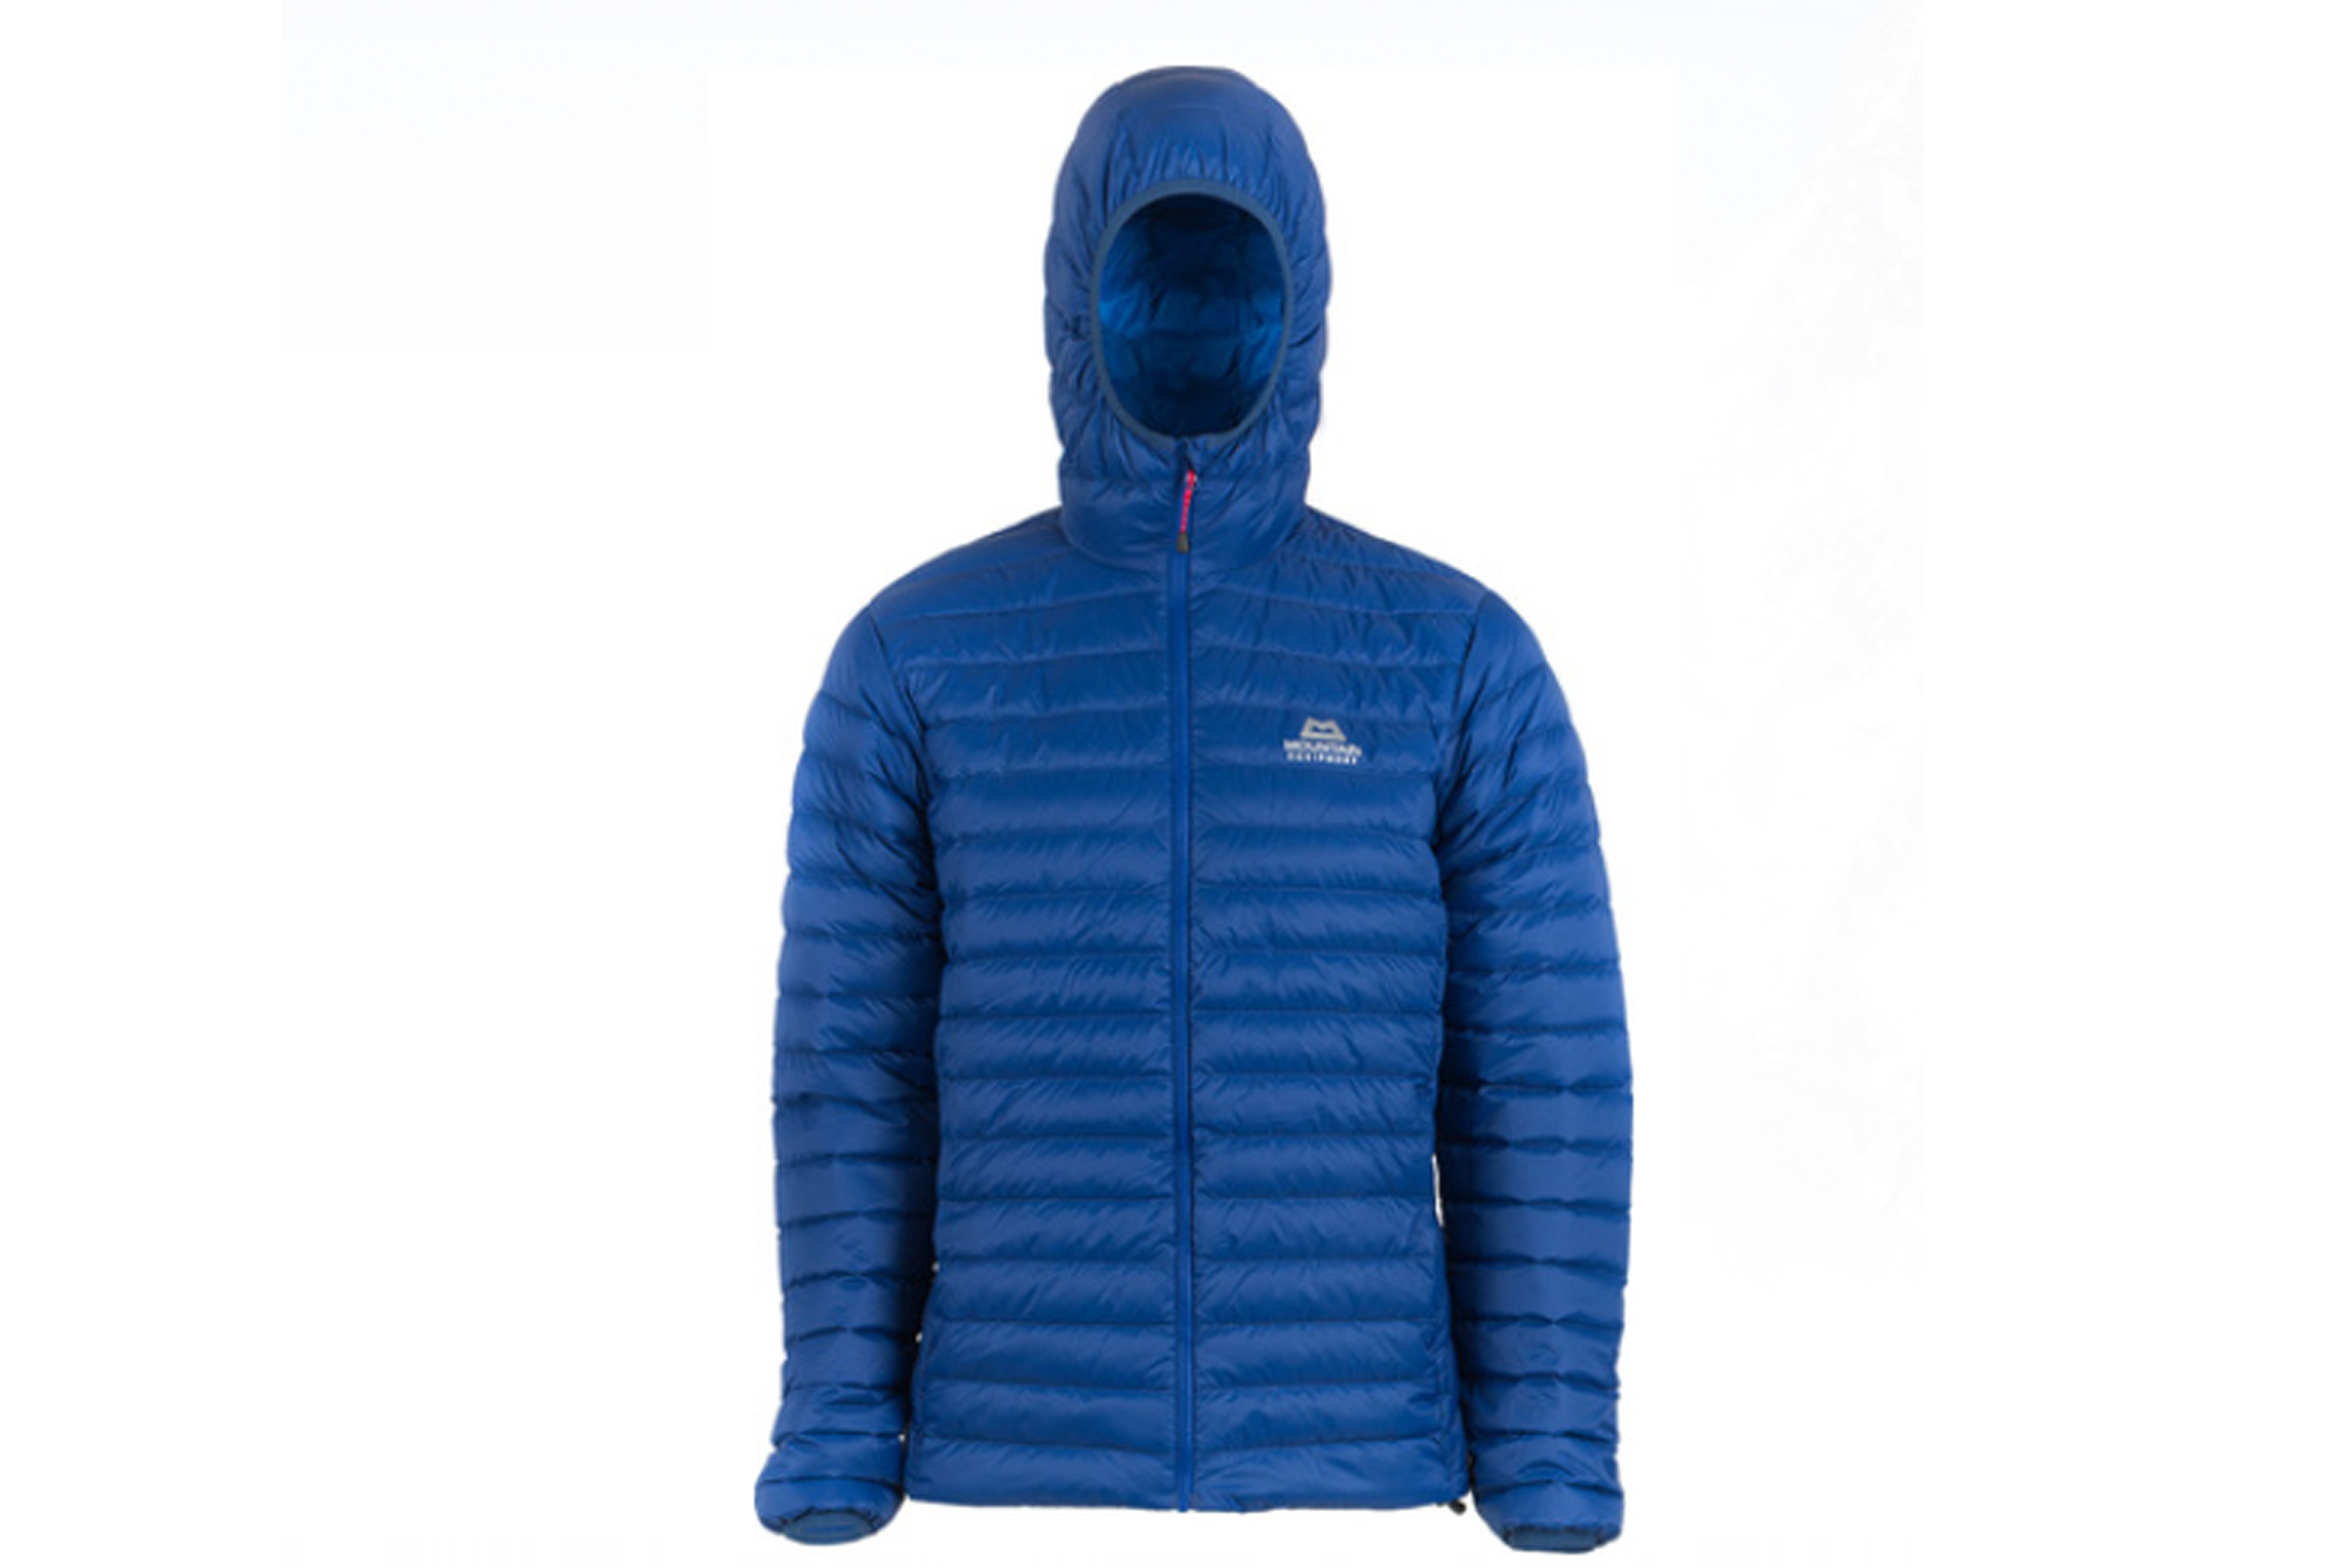 New ‘Frostline’ down jacket from Mountain Equipment